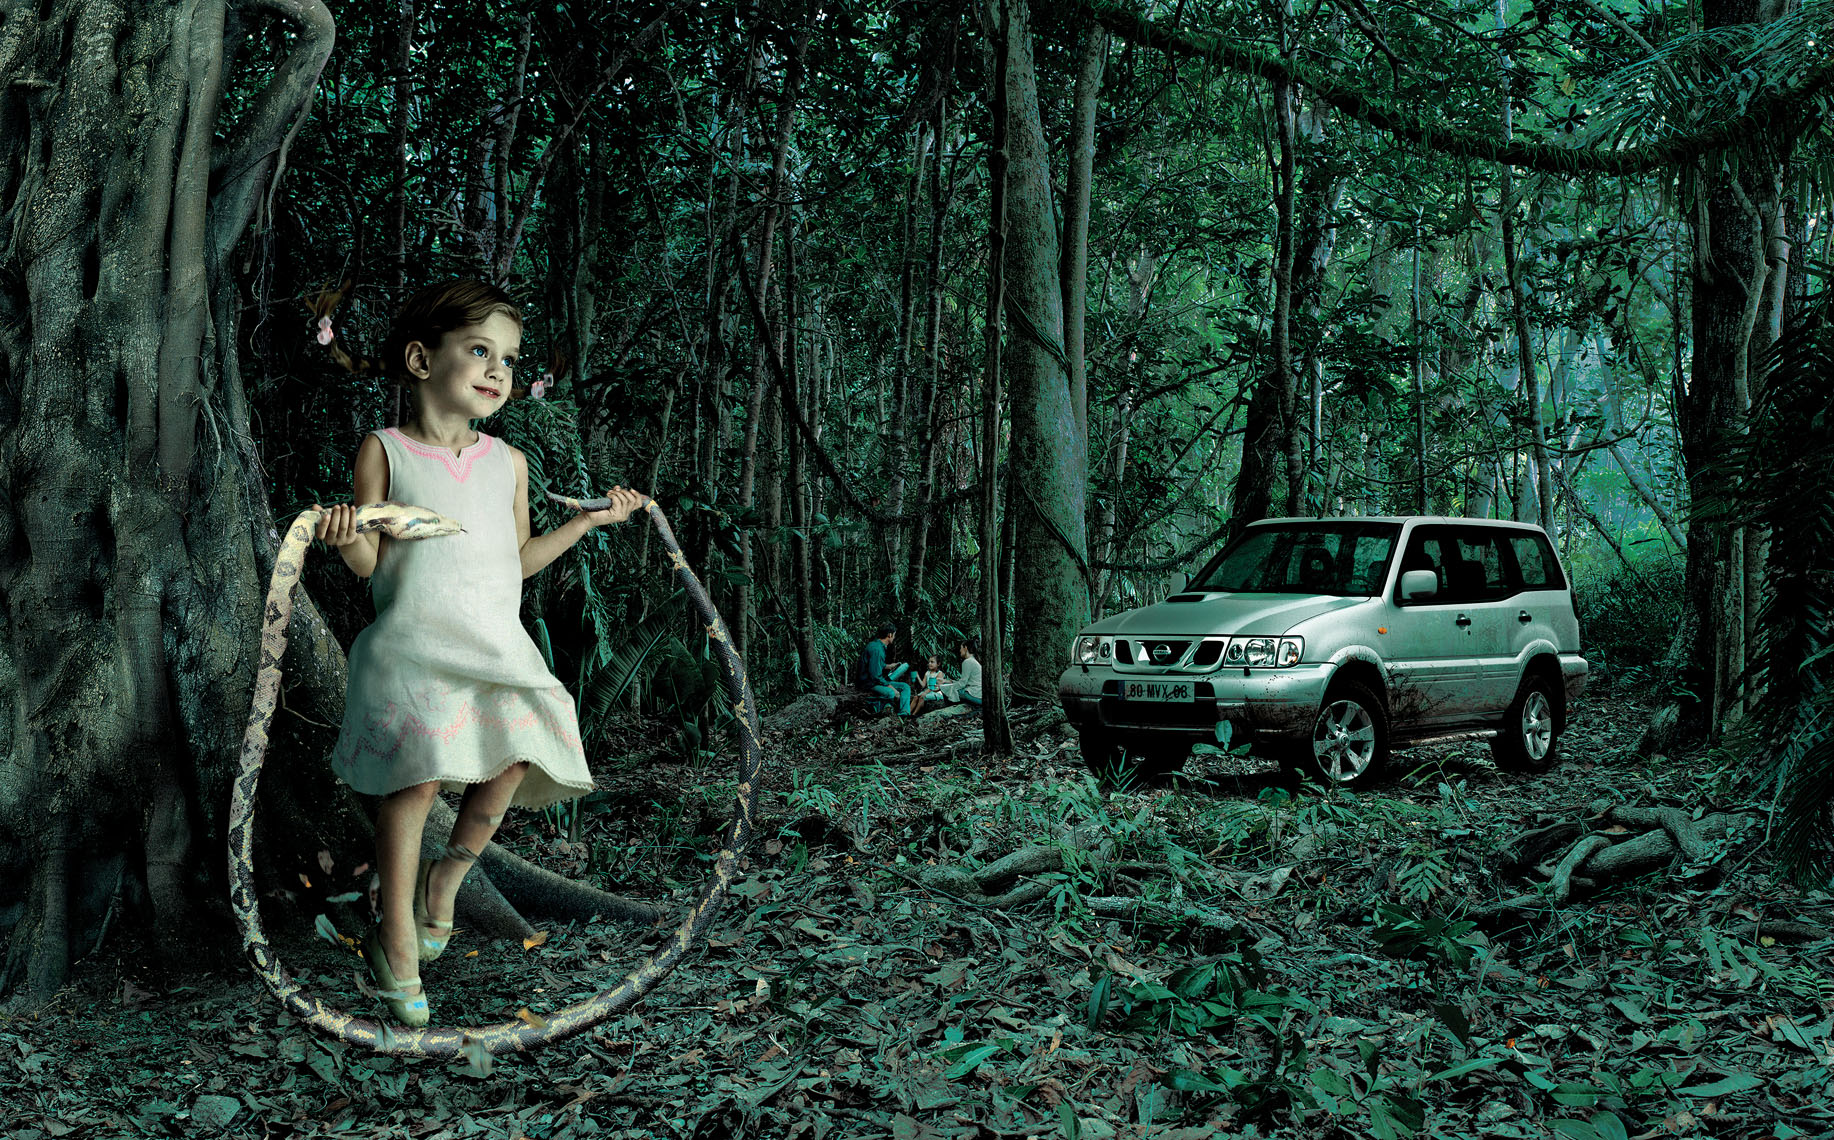  A young girl skipping with a snake in a forest with a Nissan Terrano parked in the background. 